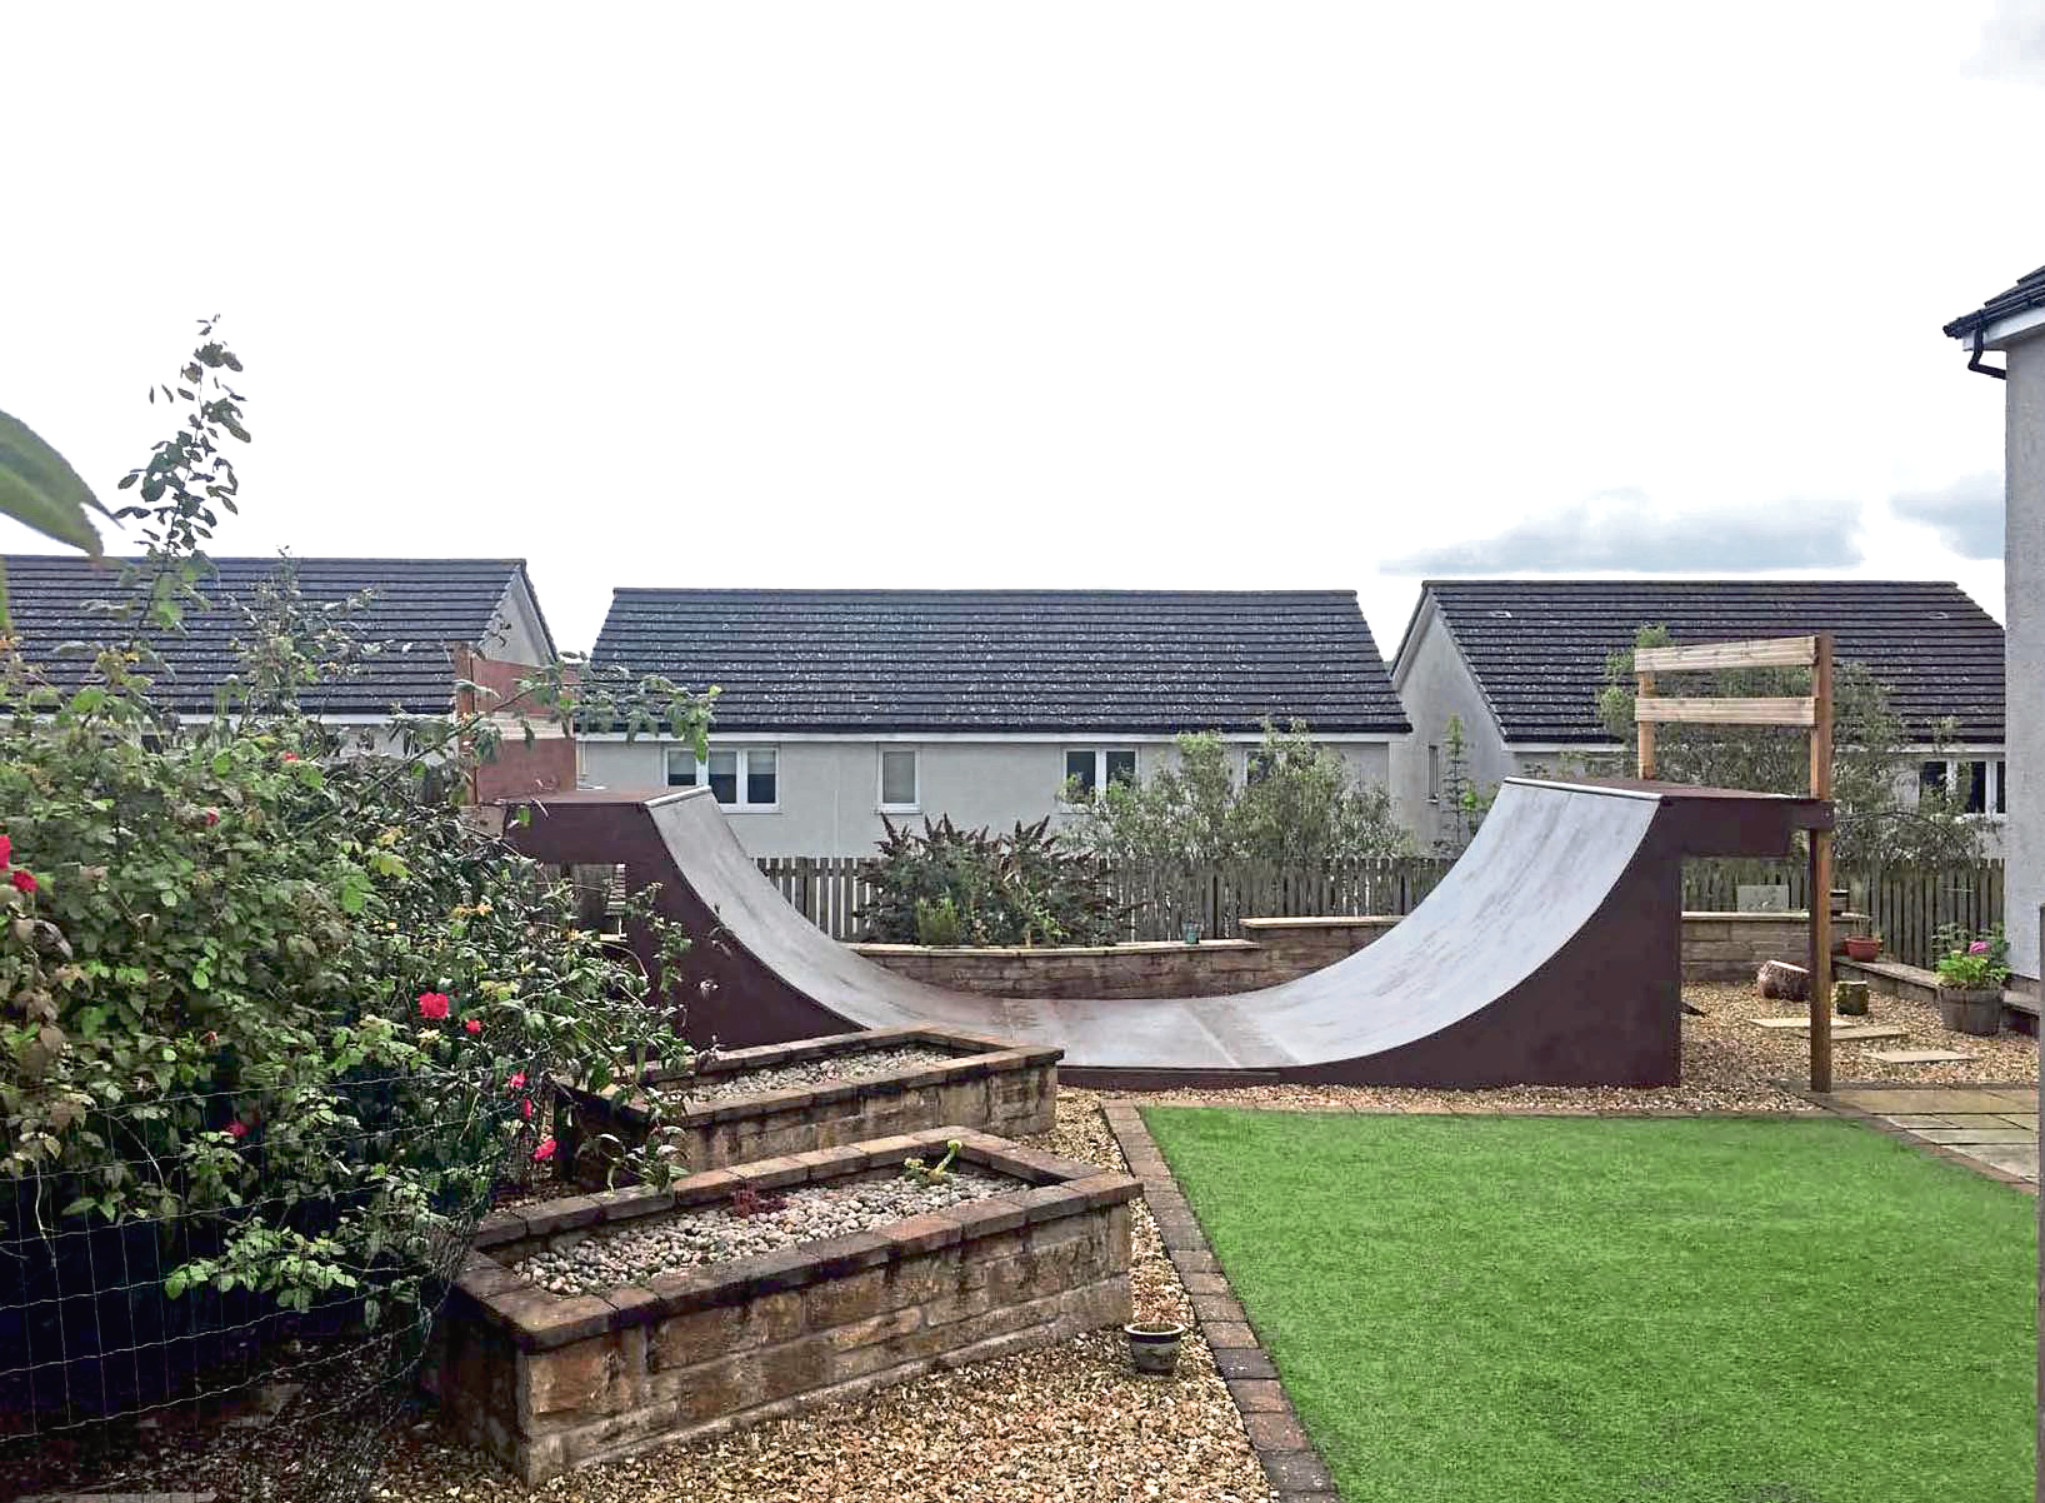 Ross Salitura erected the halfpipe ramp in the back garden of his Fife home and regularly practises his skills.